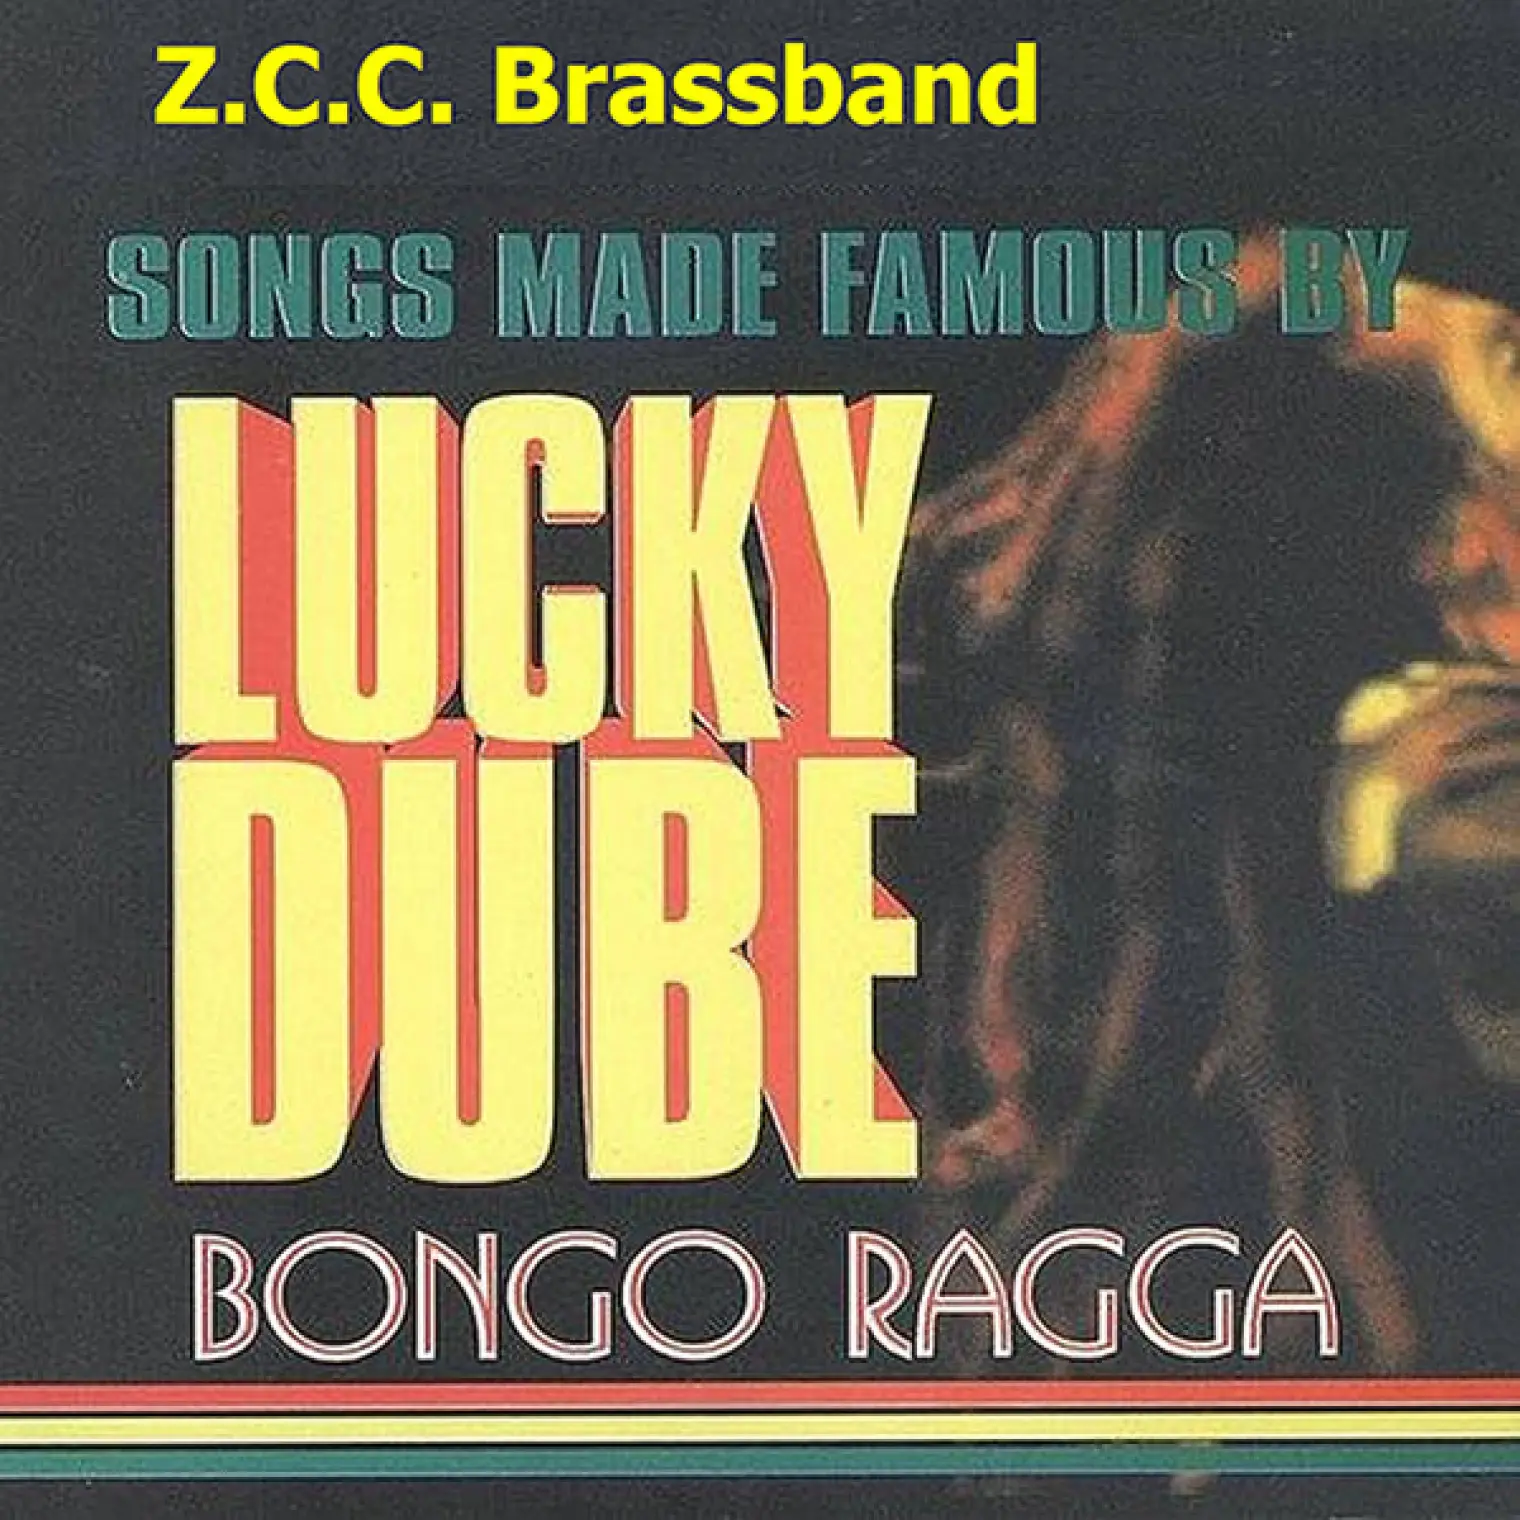 Bongo Ragga Songs Made Famous by Lucky Dube -  Z.C.C. Brass Band 